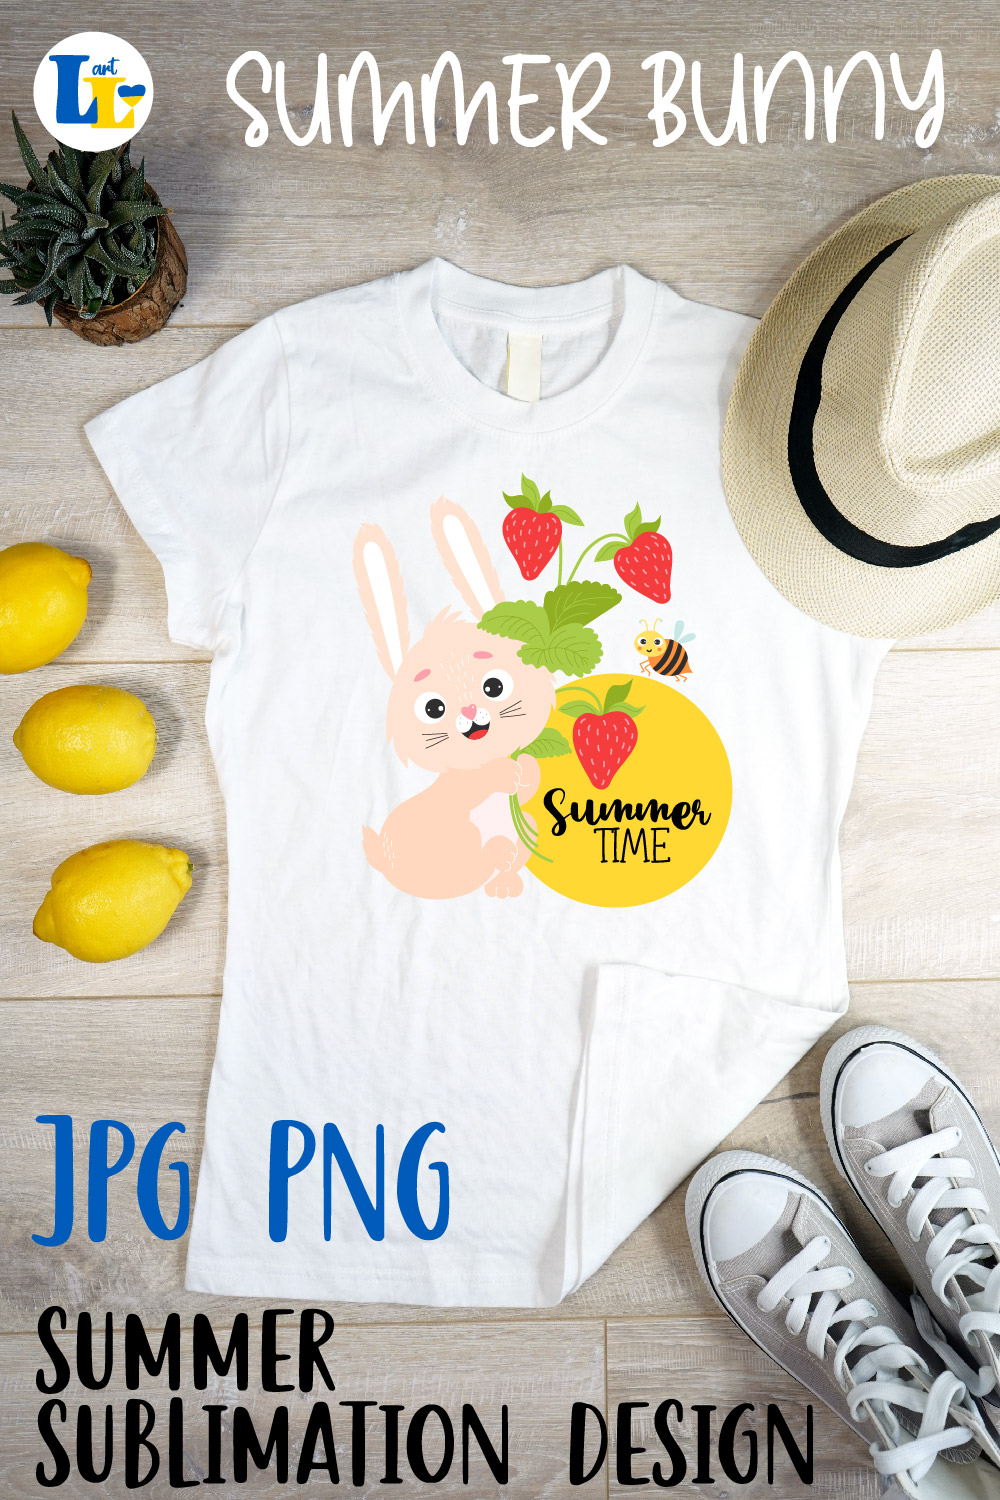 Cute Bunny With Strawberry Summer Sublimation Pinterest Image.